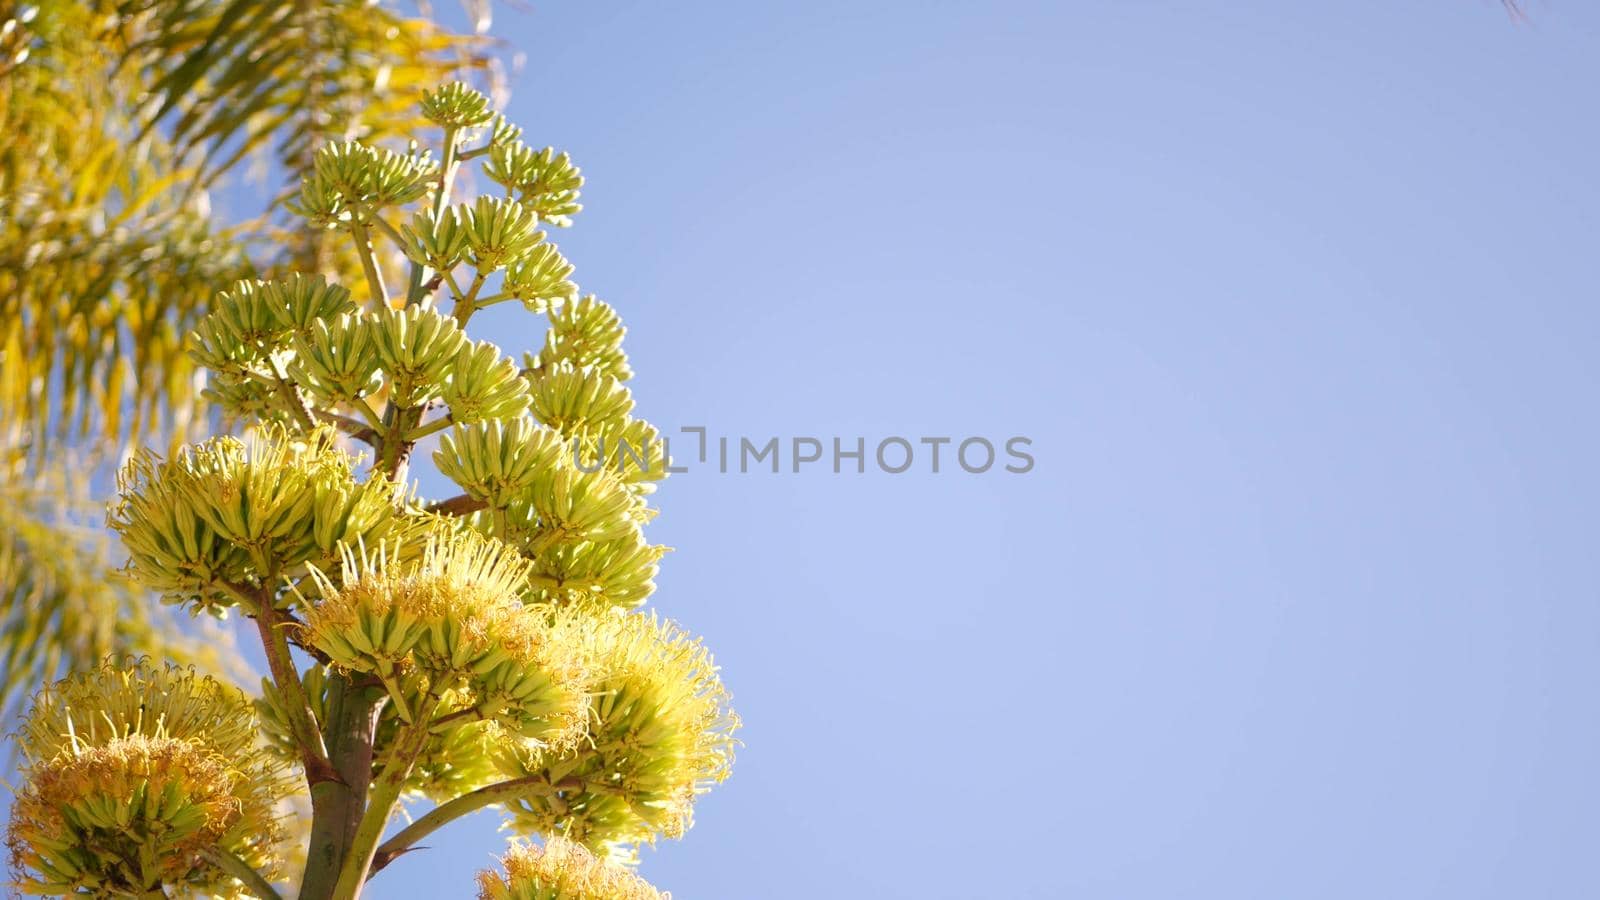 Agave flower, century or sentry plant bloom blossom or inflorescence. California by DogoraSun